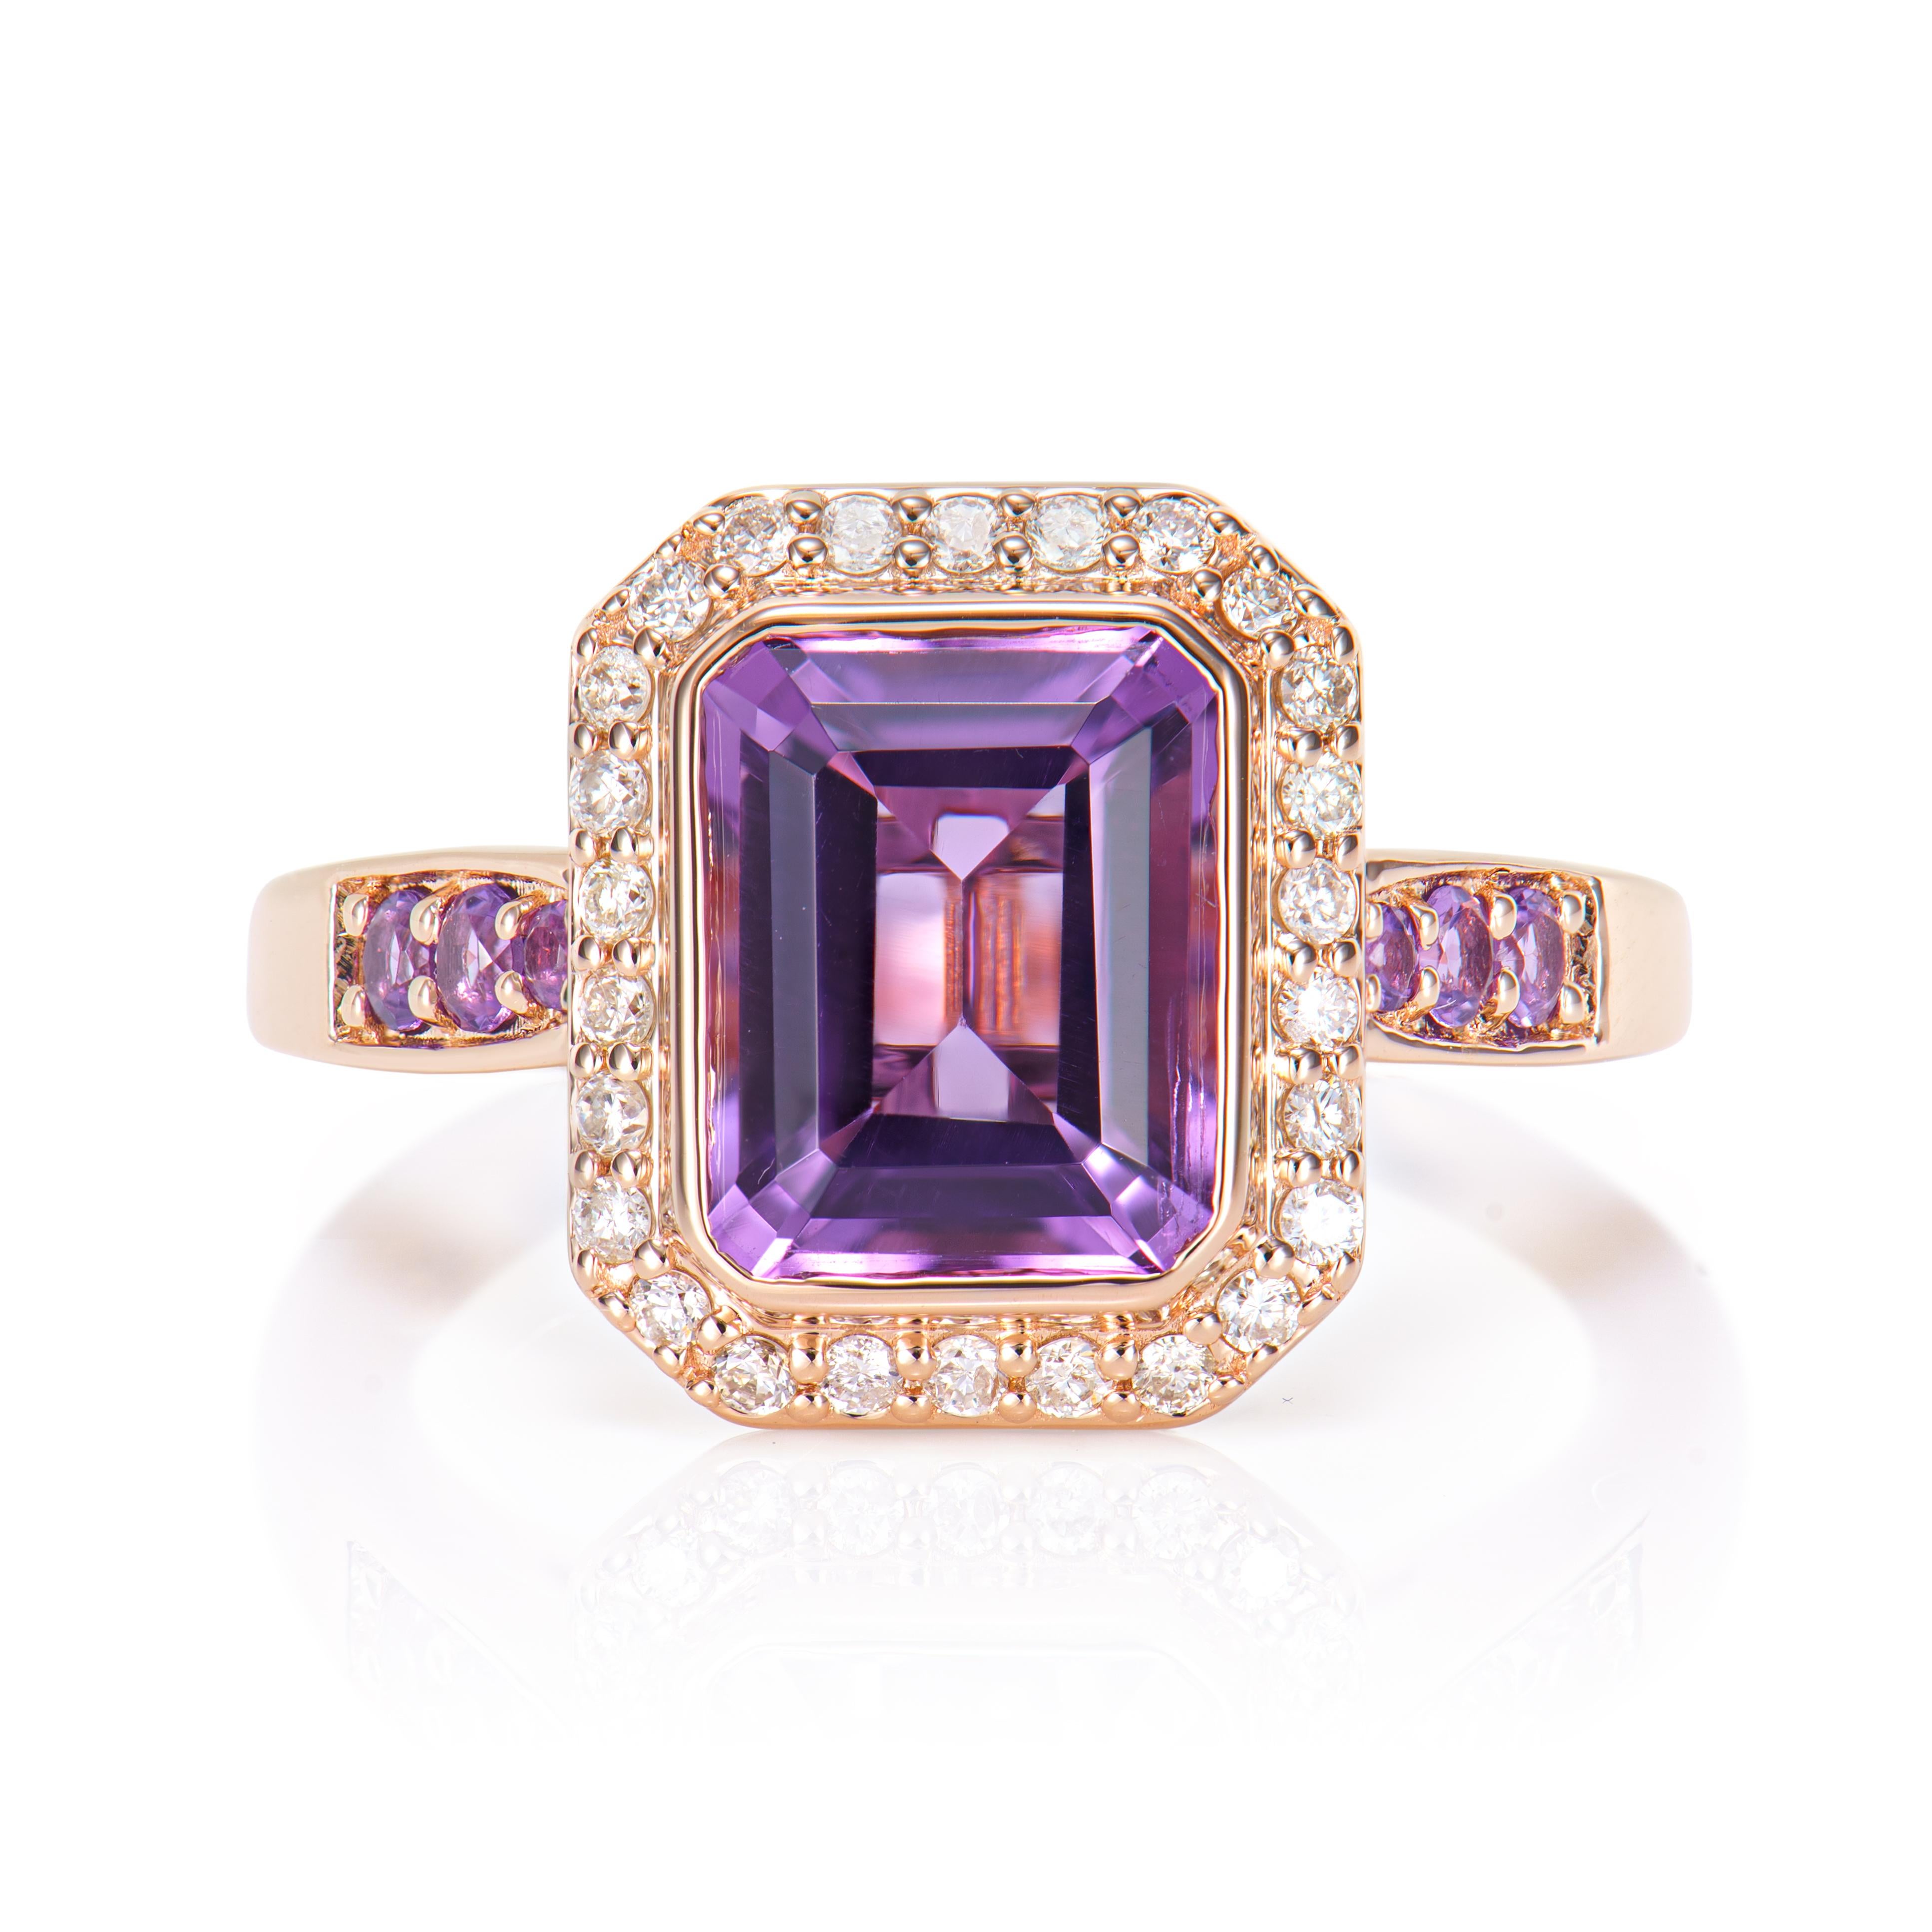 Contemporary 2.27 Carat Amethyst Fancy Ring in 14Karat Rose Gold with White Diamond.   For Sale